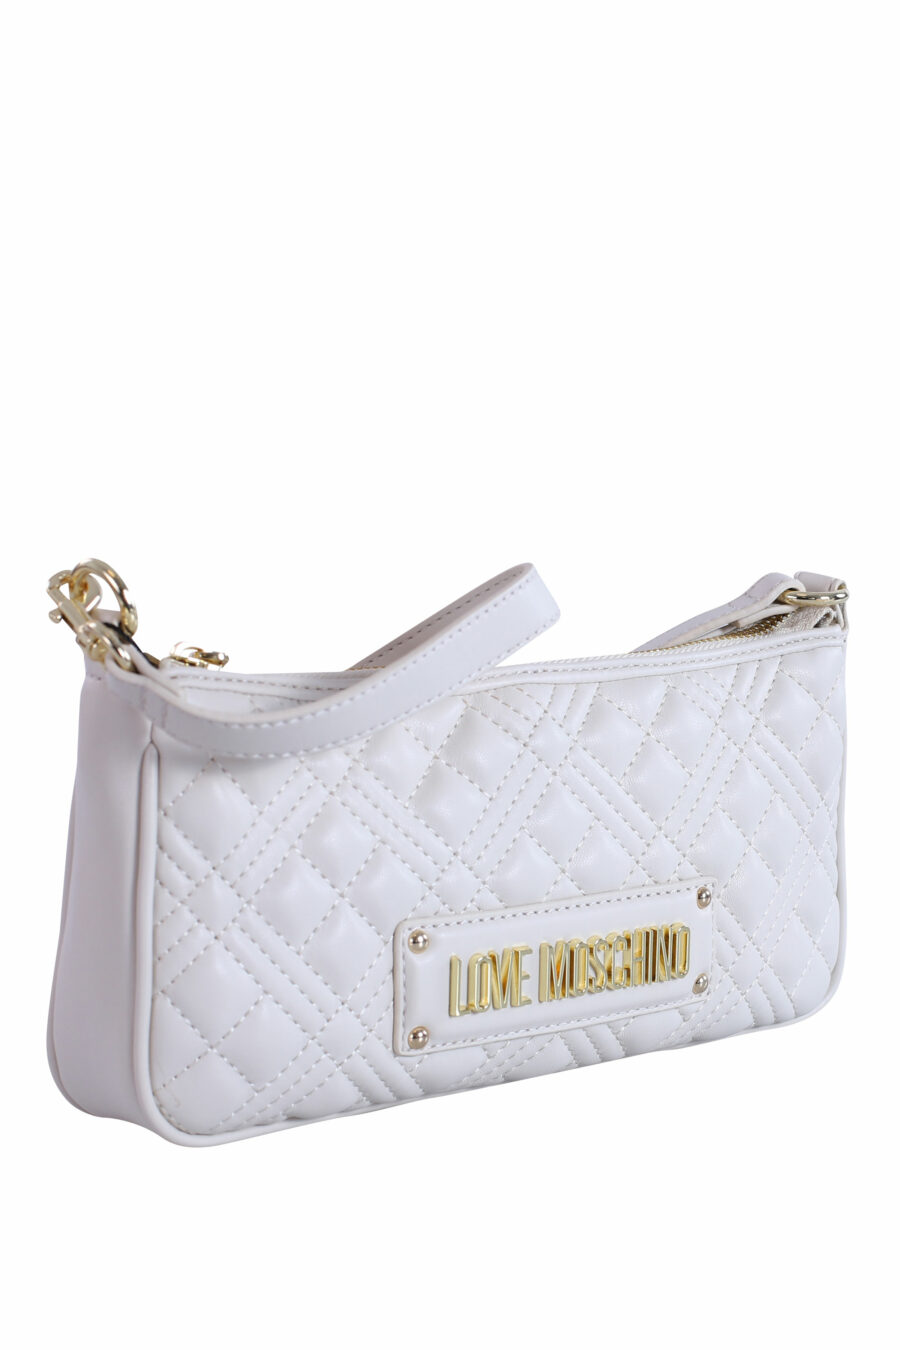 White quilted shoulder bag with gold logo - IMG 2892